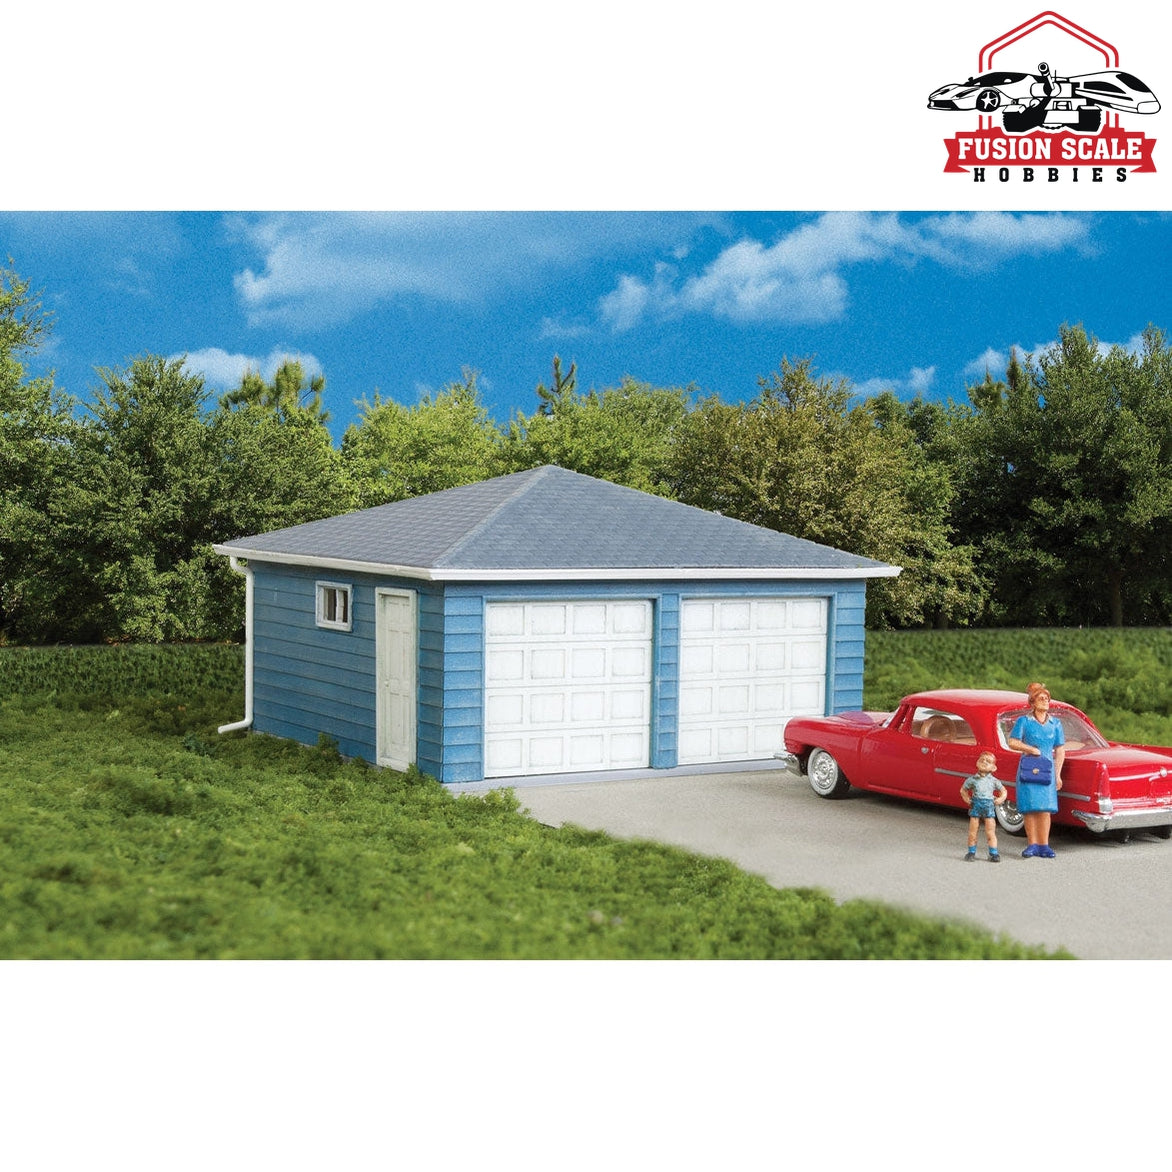 Walthers Cornerstone HO Scale TwoCar Garage Kit 31/8 x 31/8 x 2" 7.9 x 7.9 x 5cm over eaves